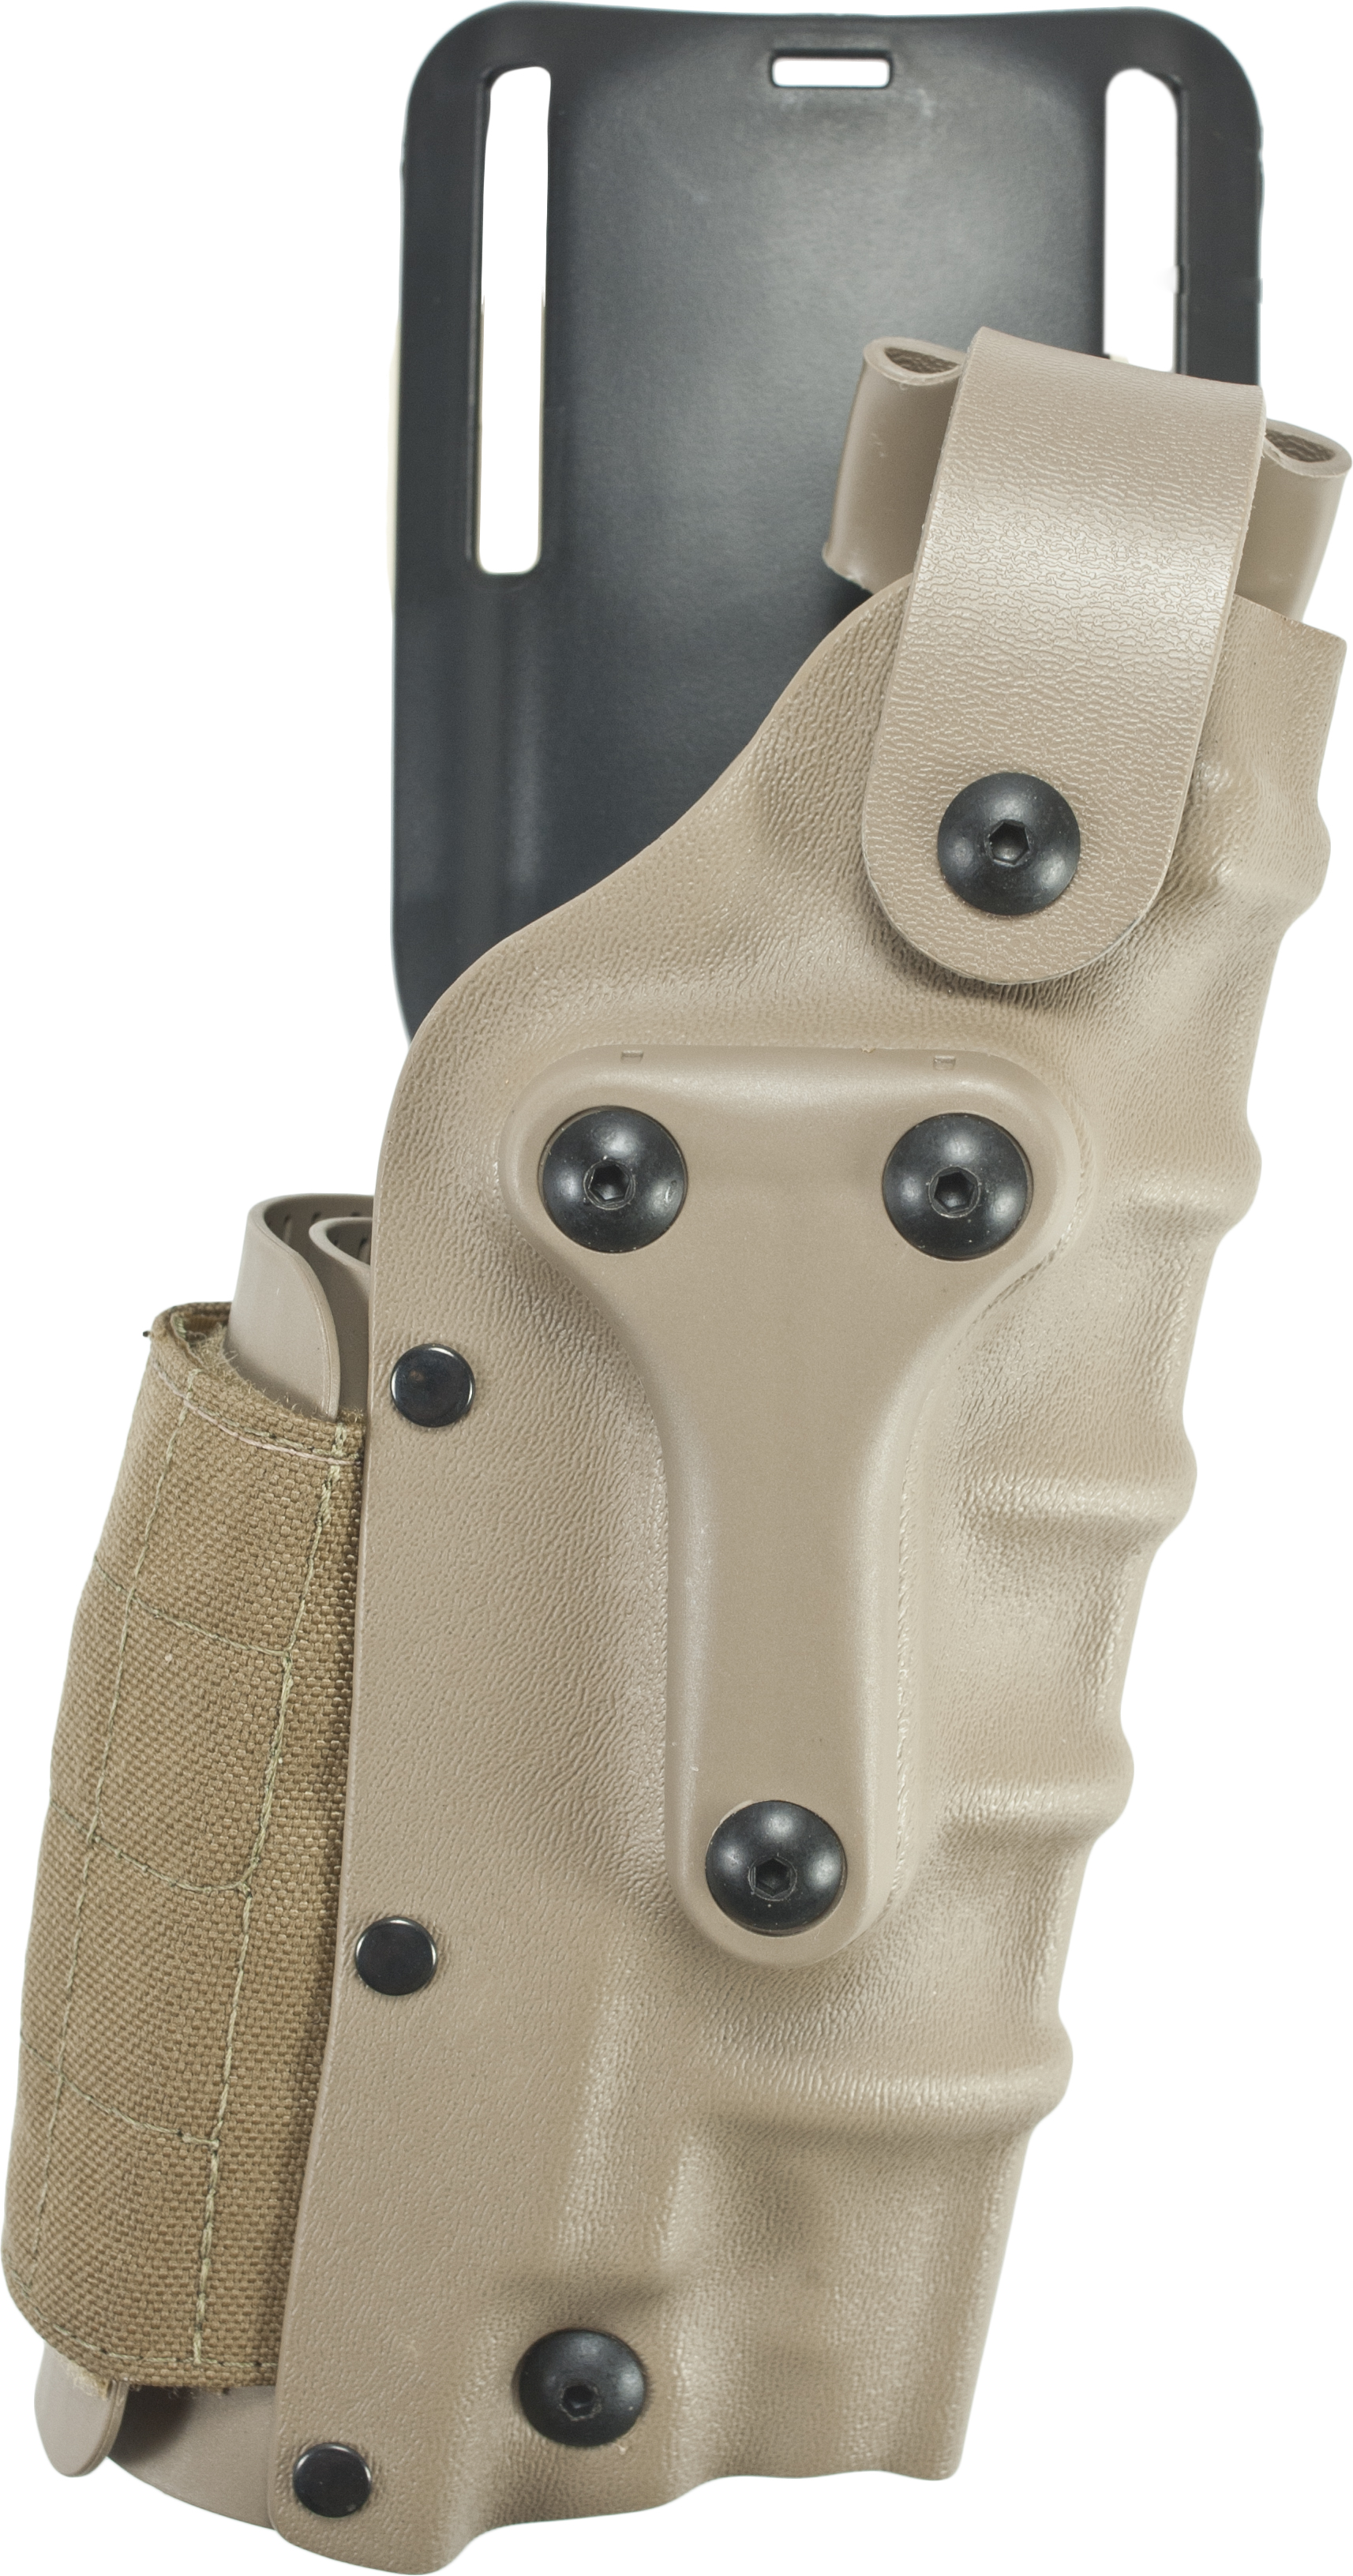 Safariland Military Tactical Holster - STX FDE Brown, Right 3285-73-551